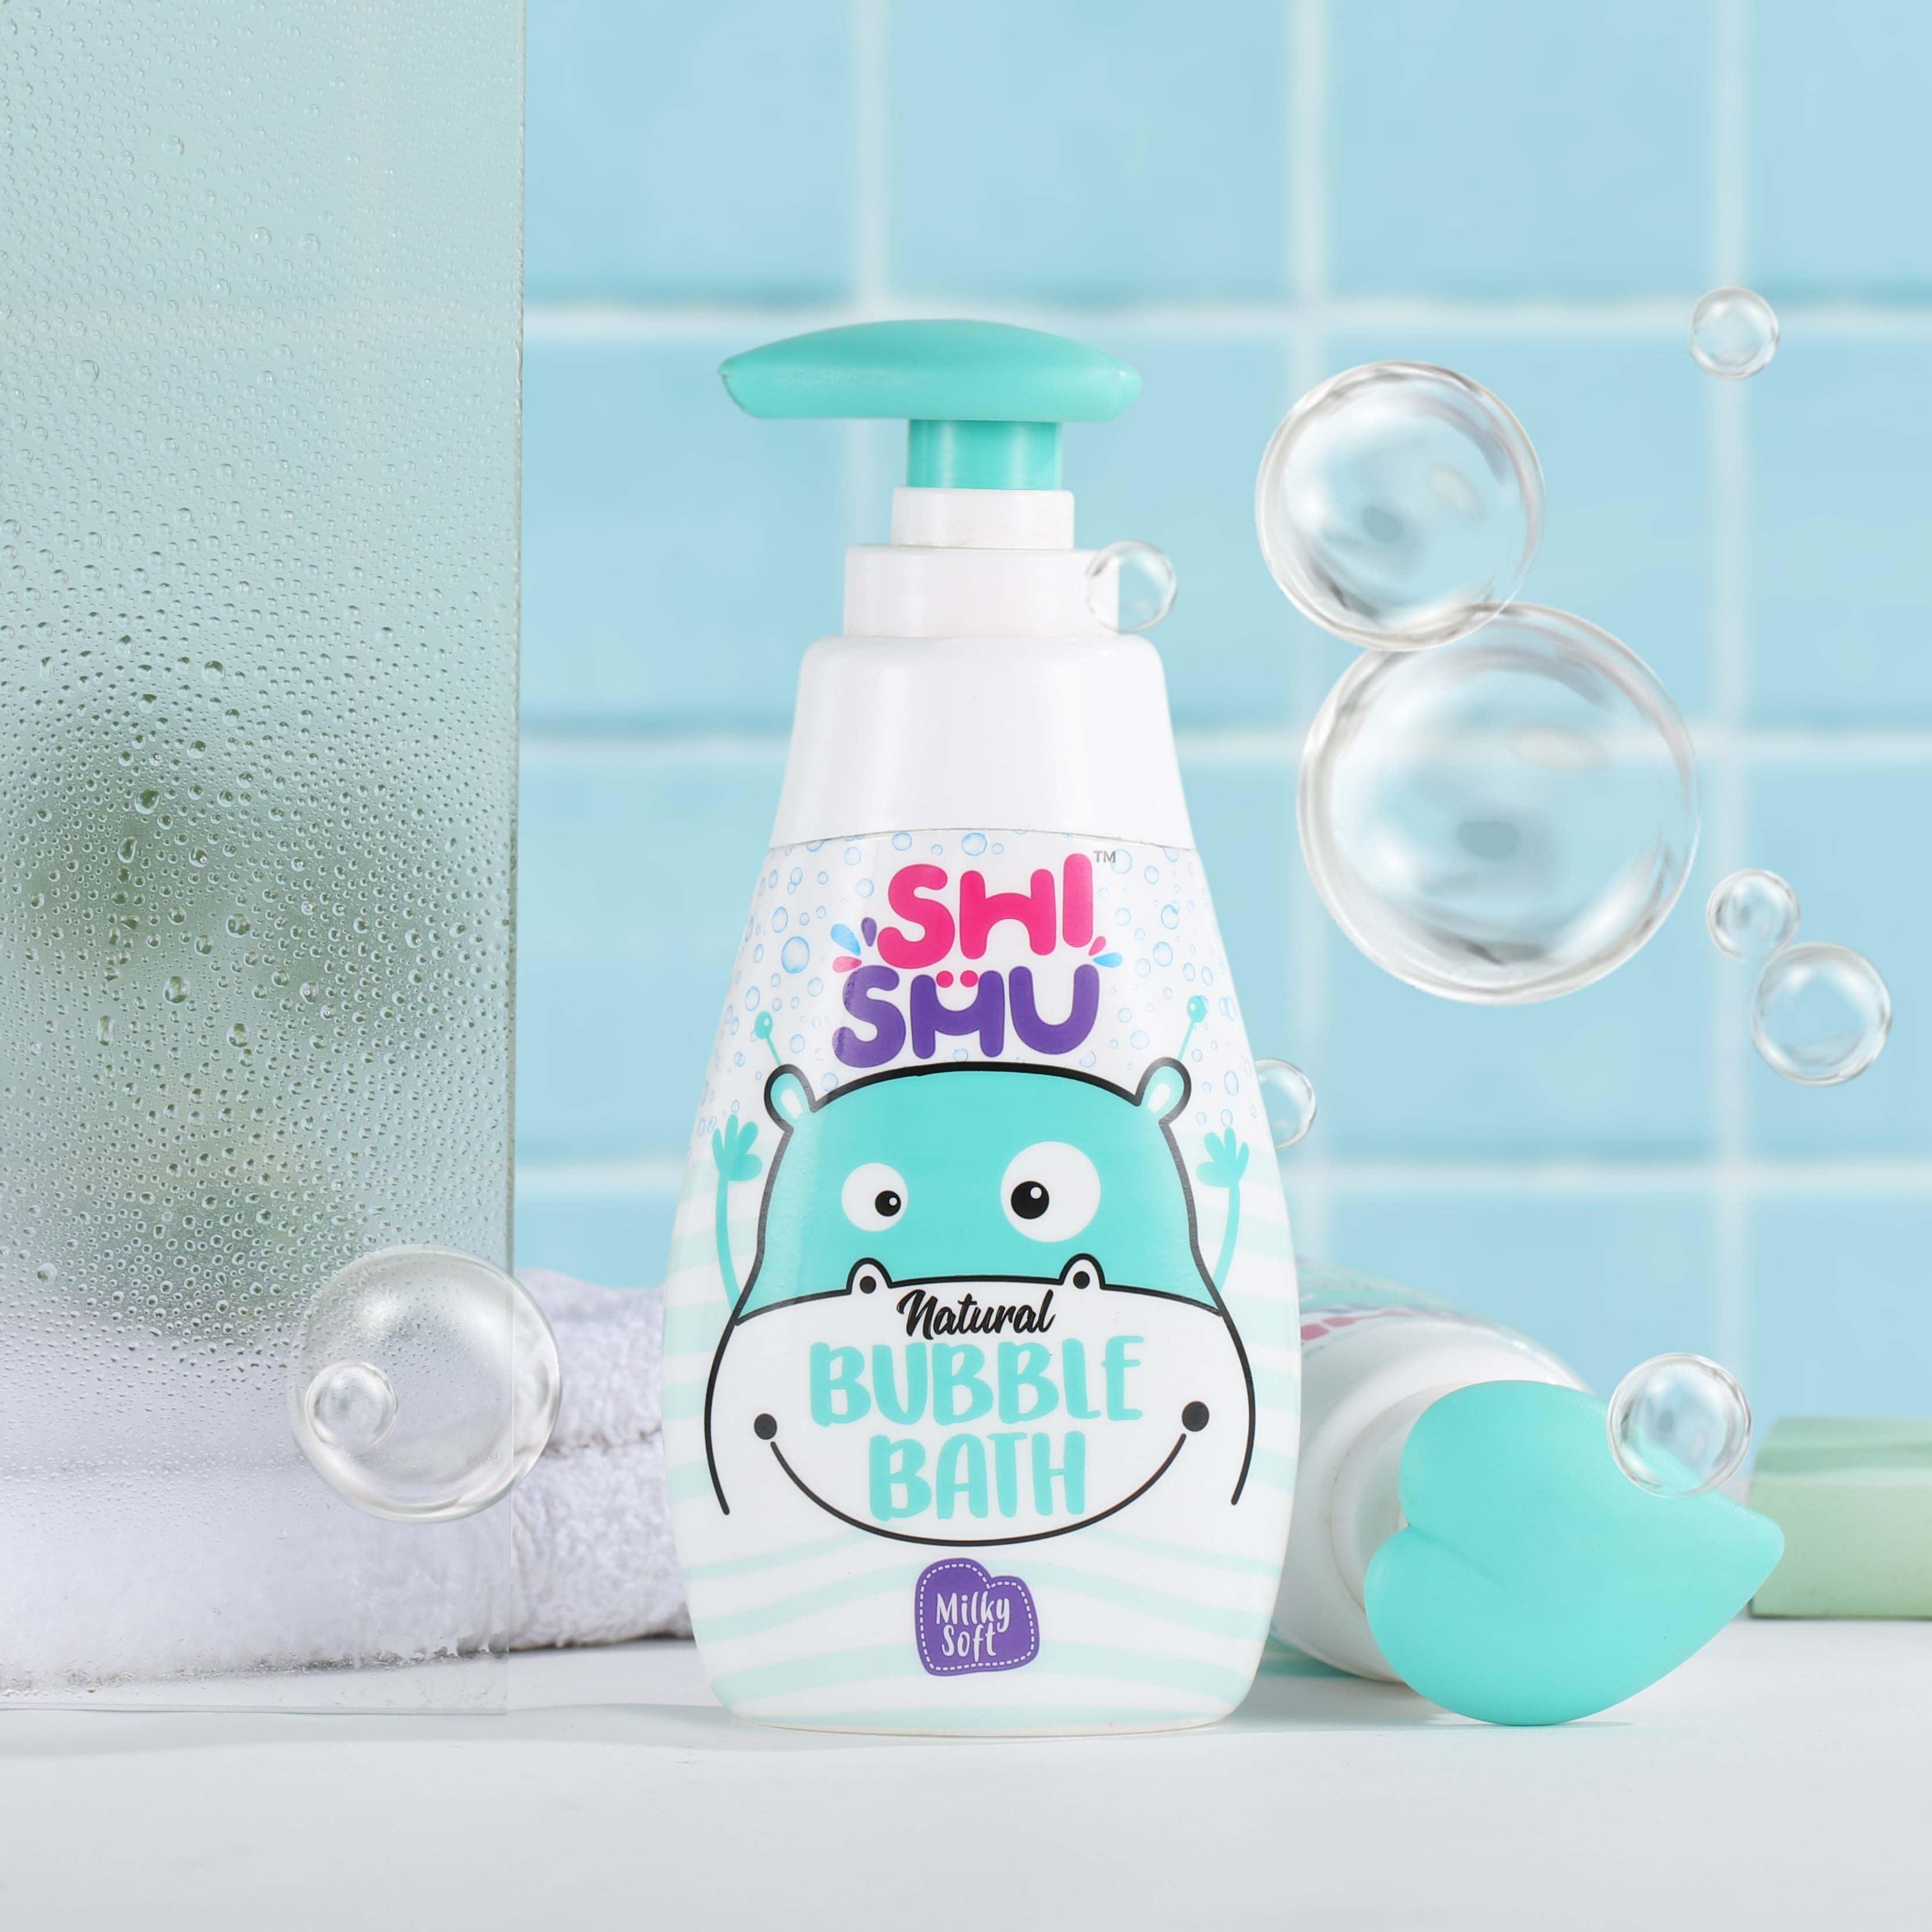 Shishu Natural Baby Bath Essentials for Everyday Babycare